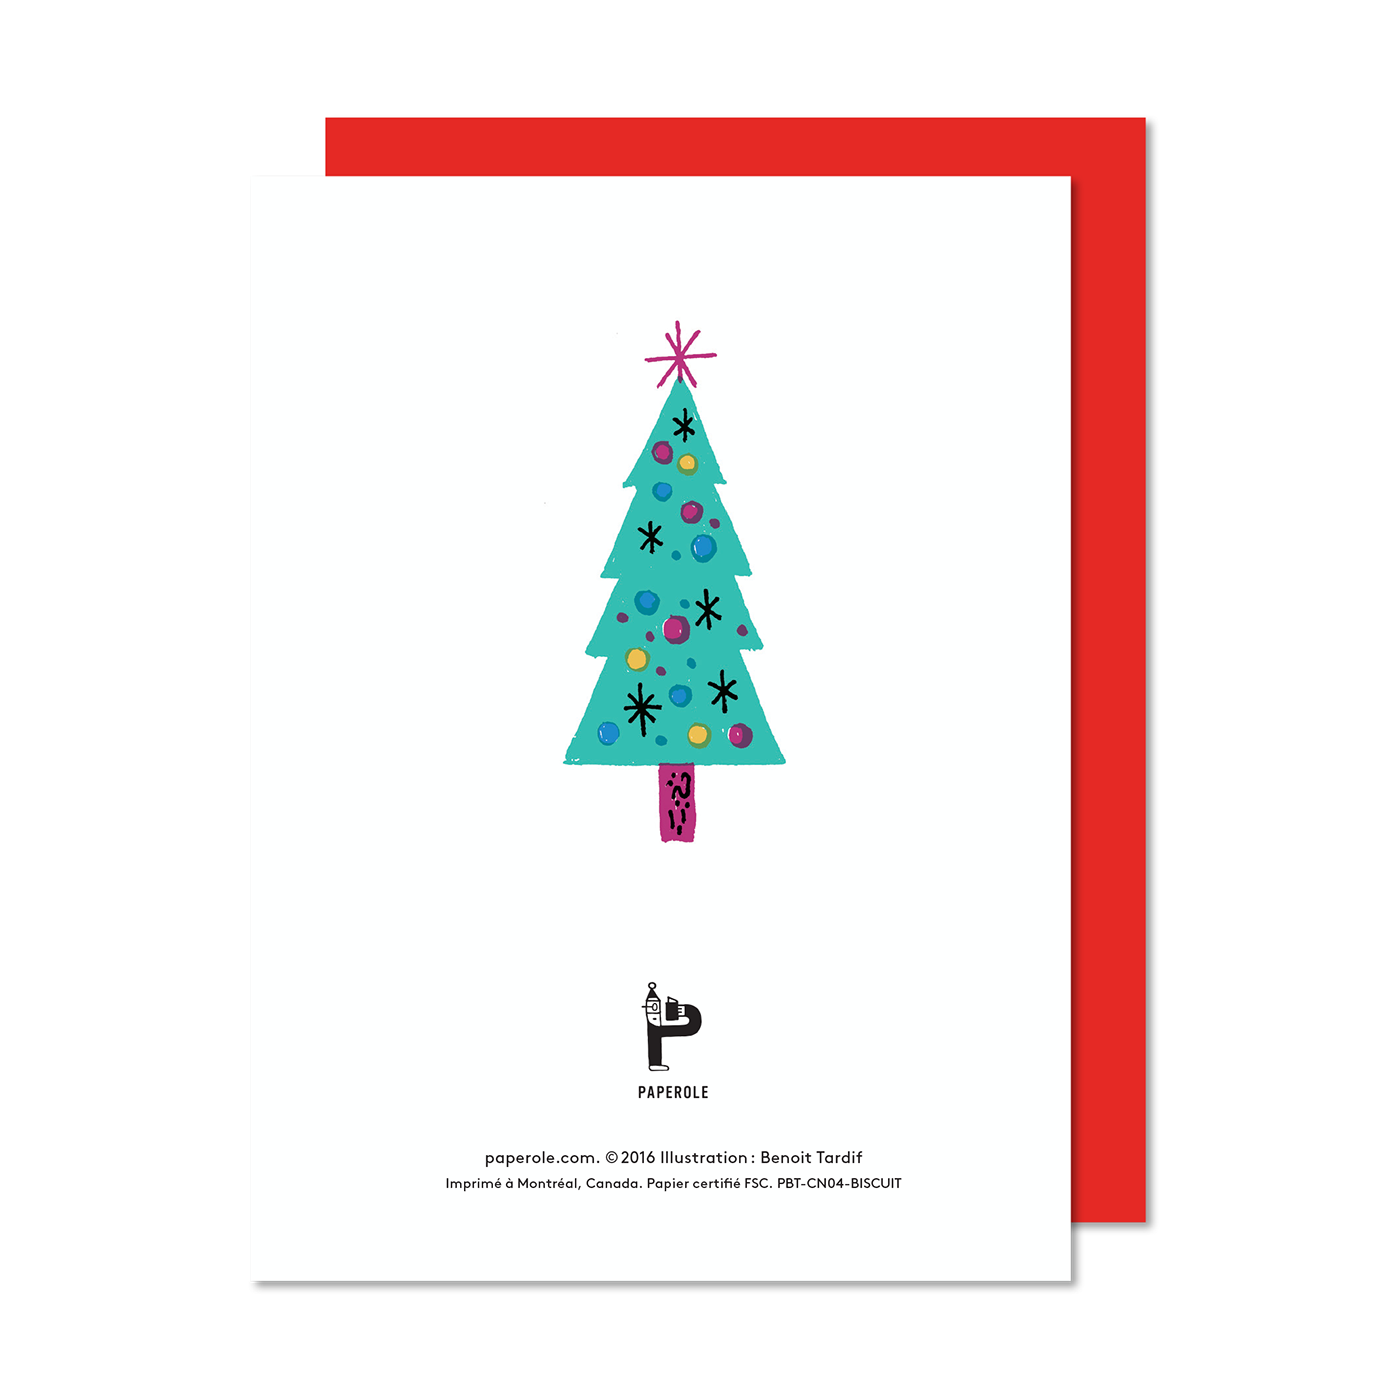 Benoit Tardif greeting card Stationery Holiday Christmas ILLUSTRATION  papeterie carte de voeux